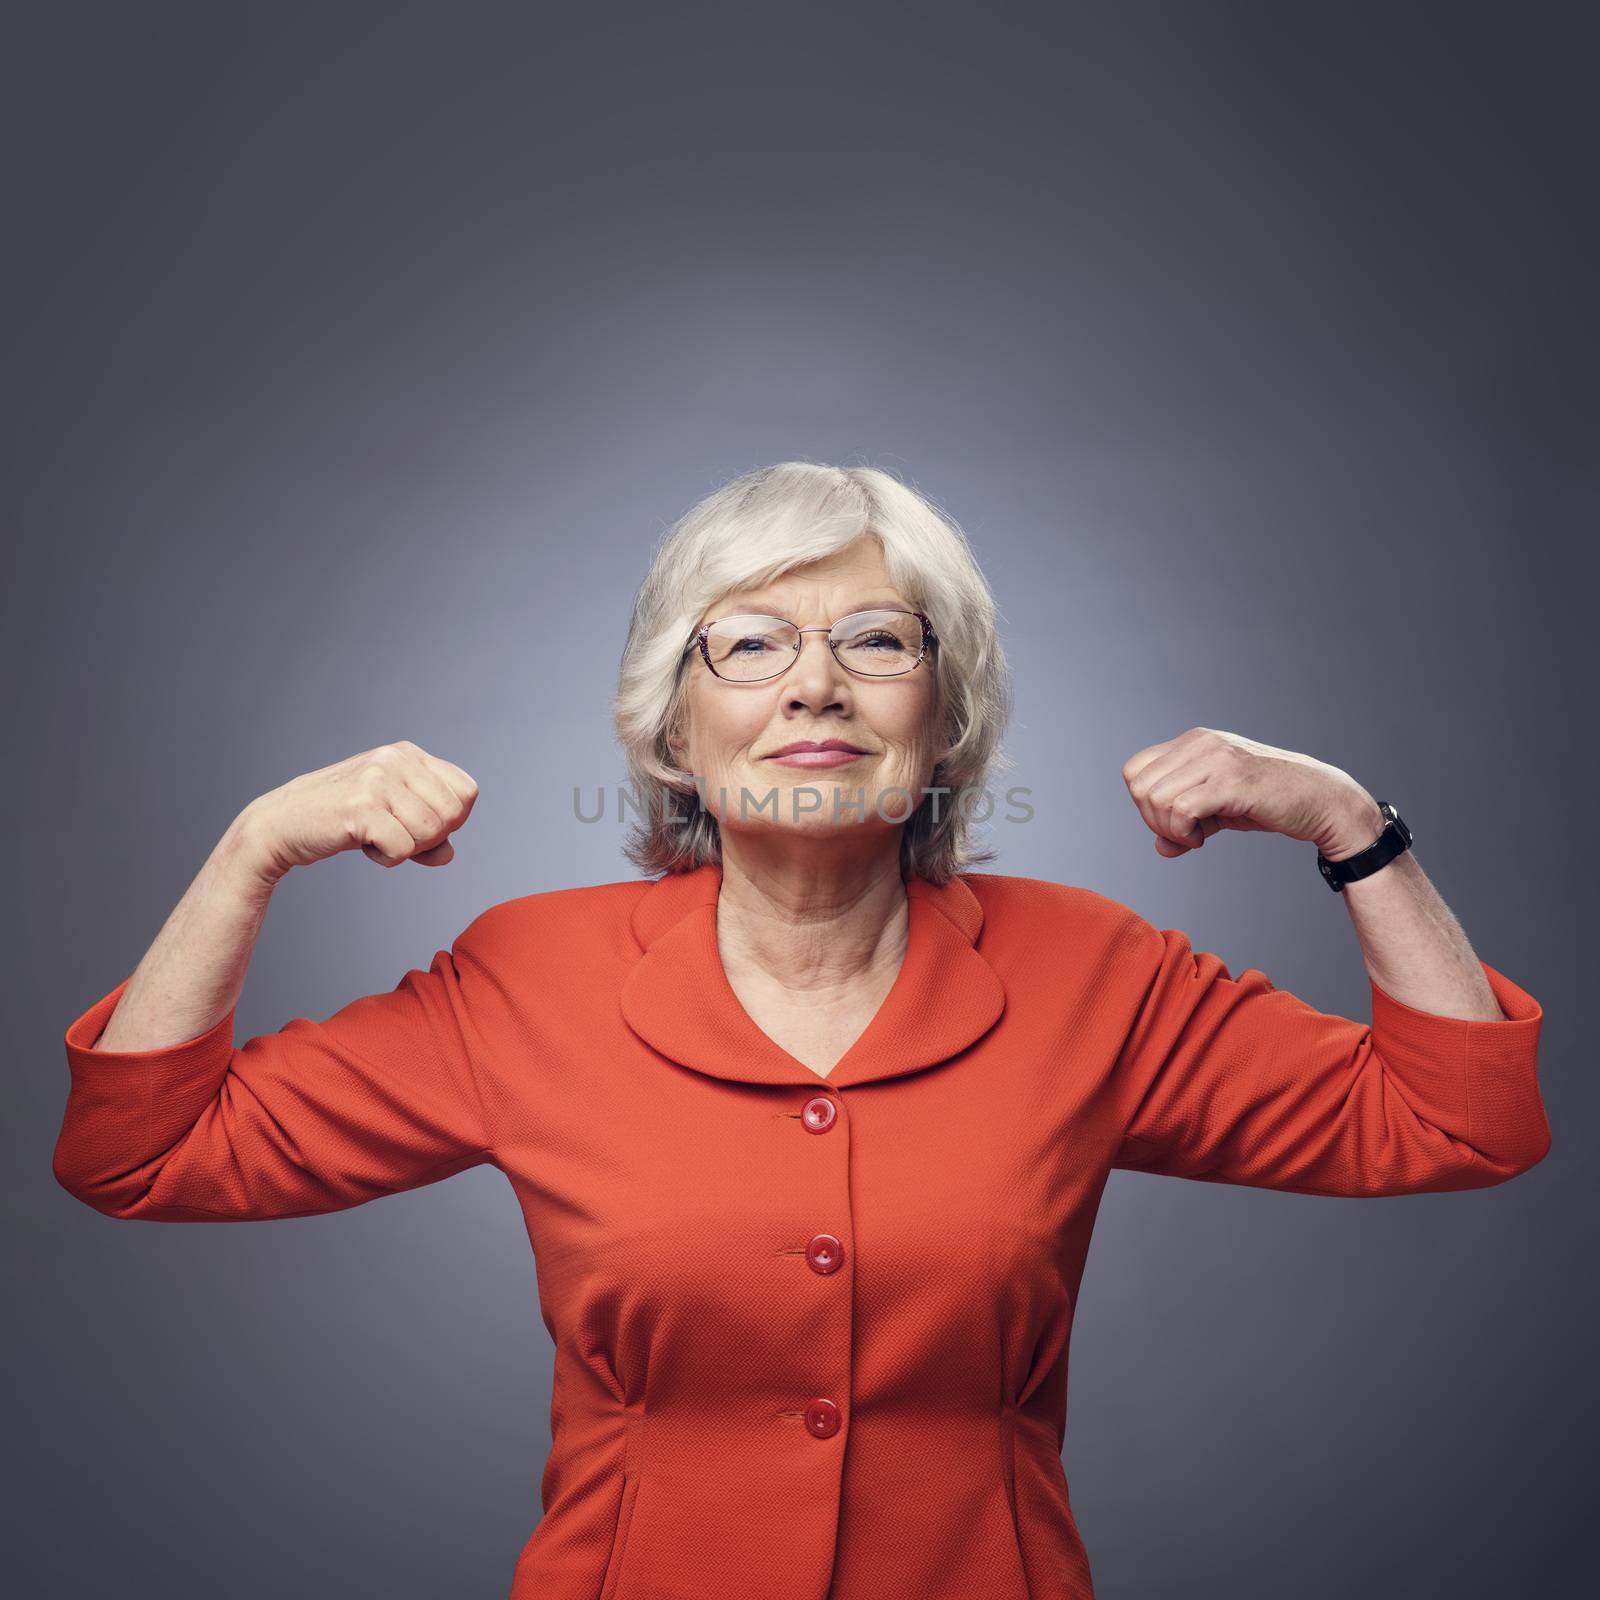 Smiling senior lady showing her muscles on gray background with copy space